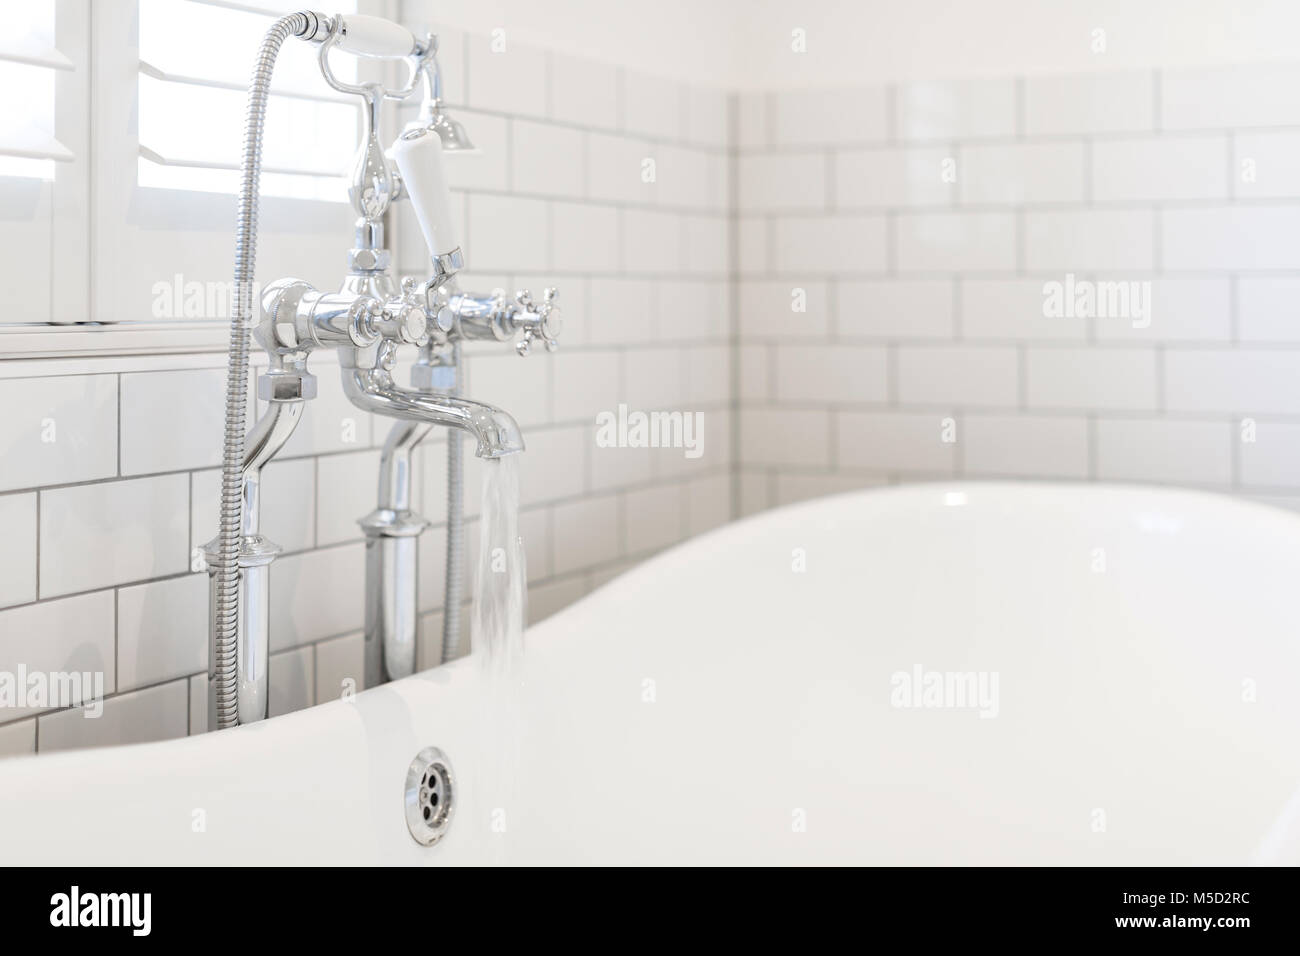 Water running from bathroom faucet into white soaking tub Stock Photo